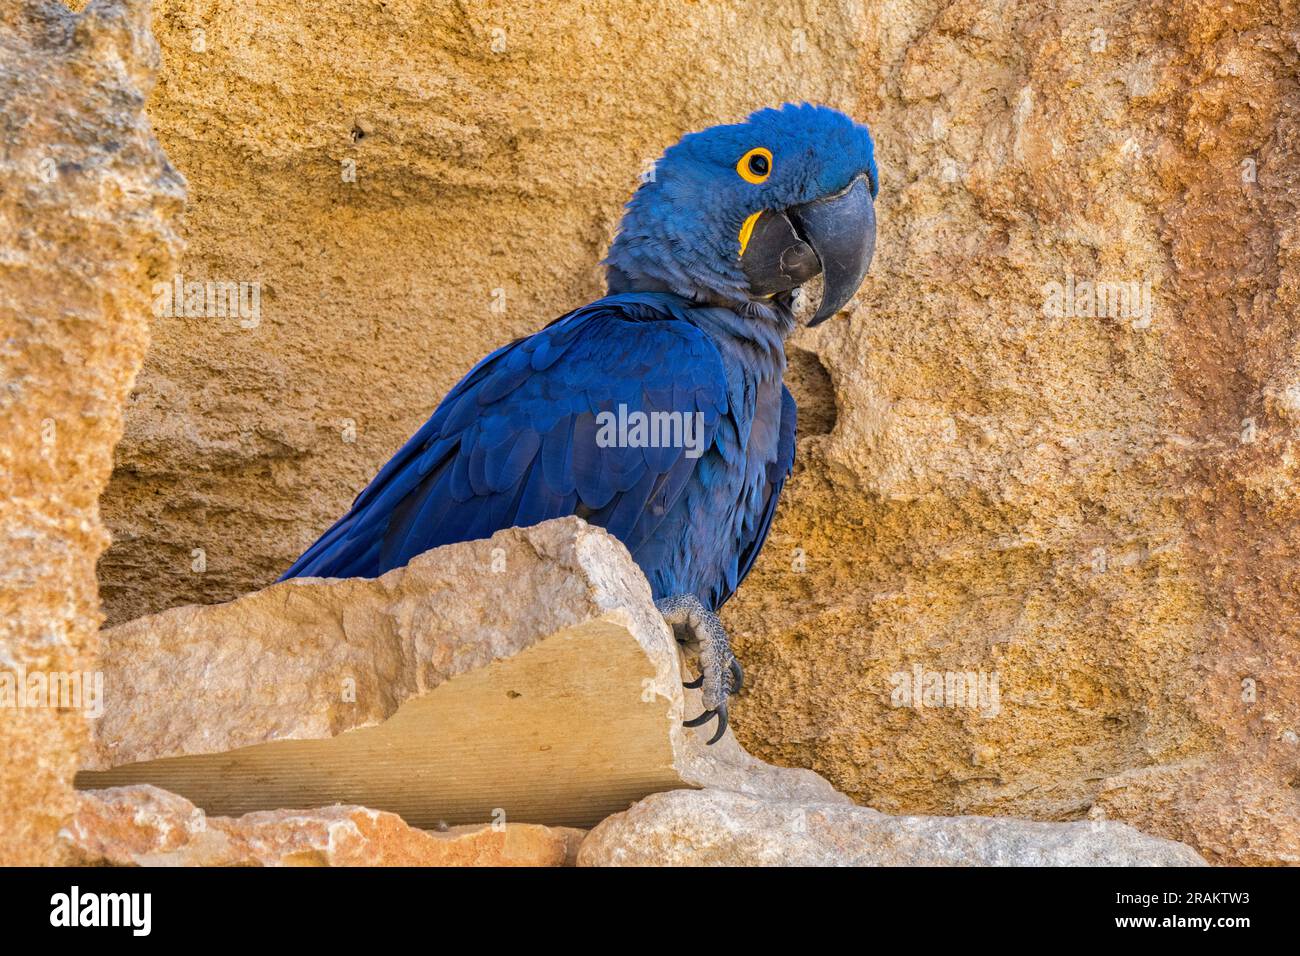 Hyacinth macaw / hyacinthine macaw (Anodorhynchus hyacinthinus) on rock ledge in cliff face, parrot native to central and eastern South America Stock Photo